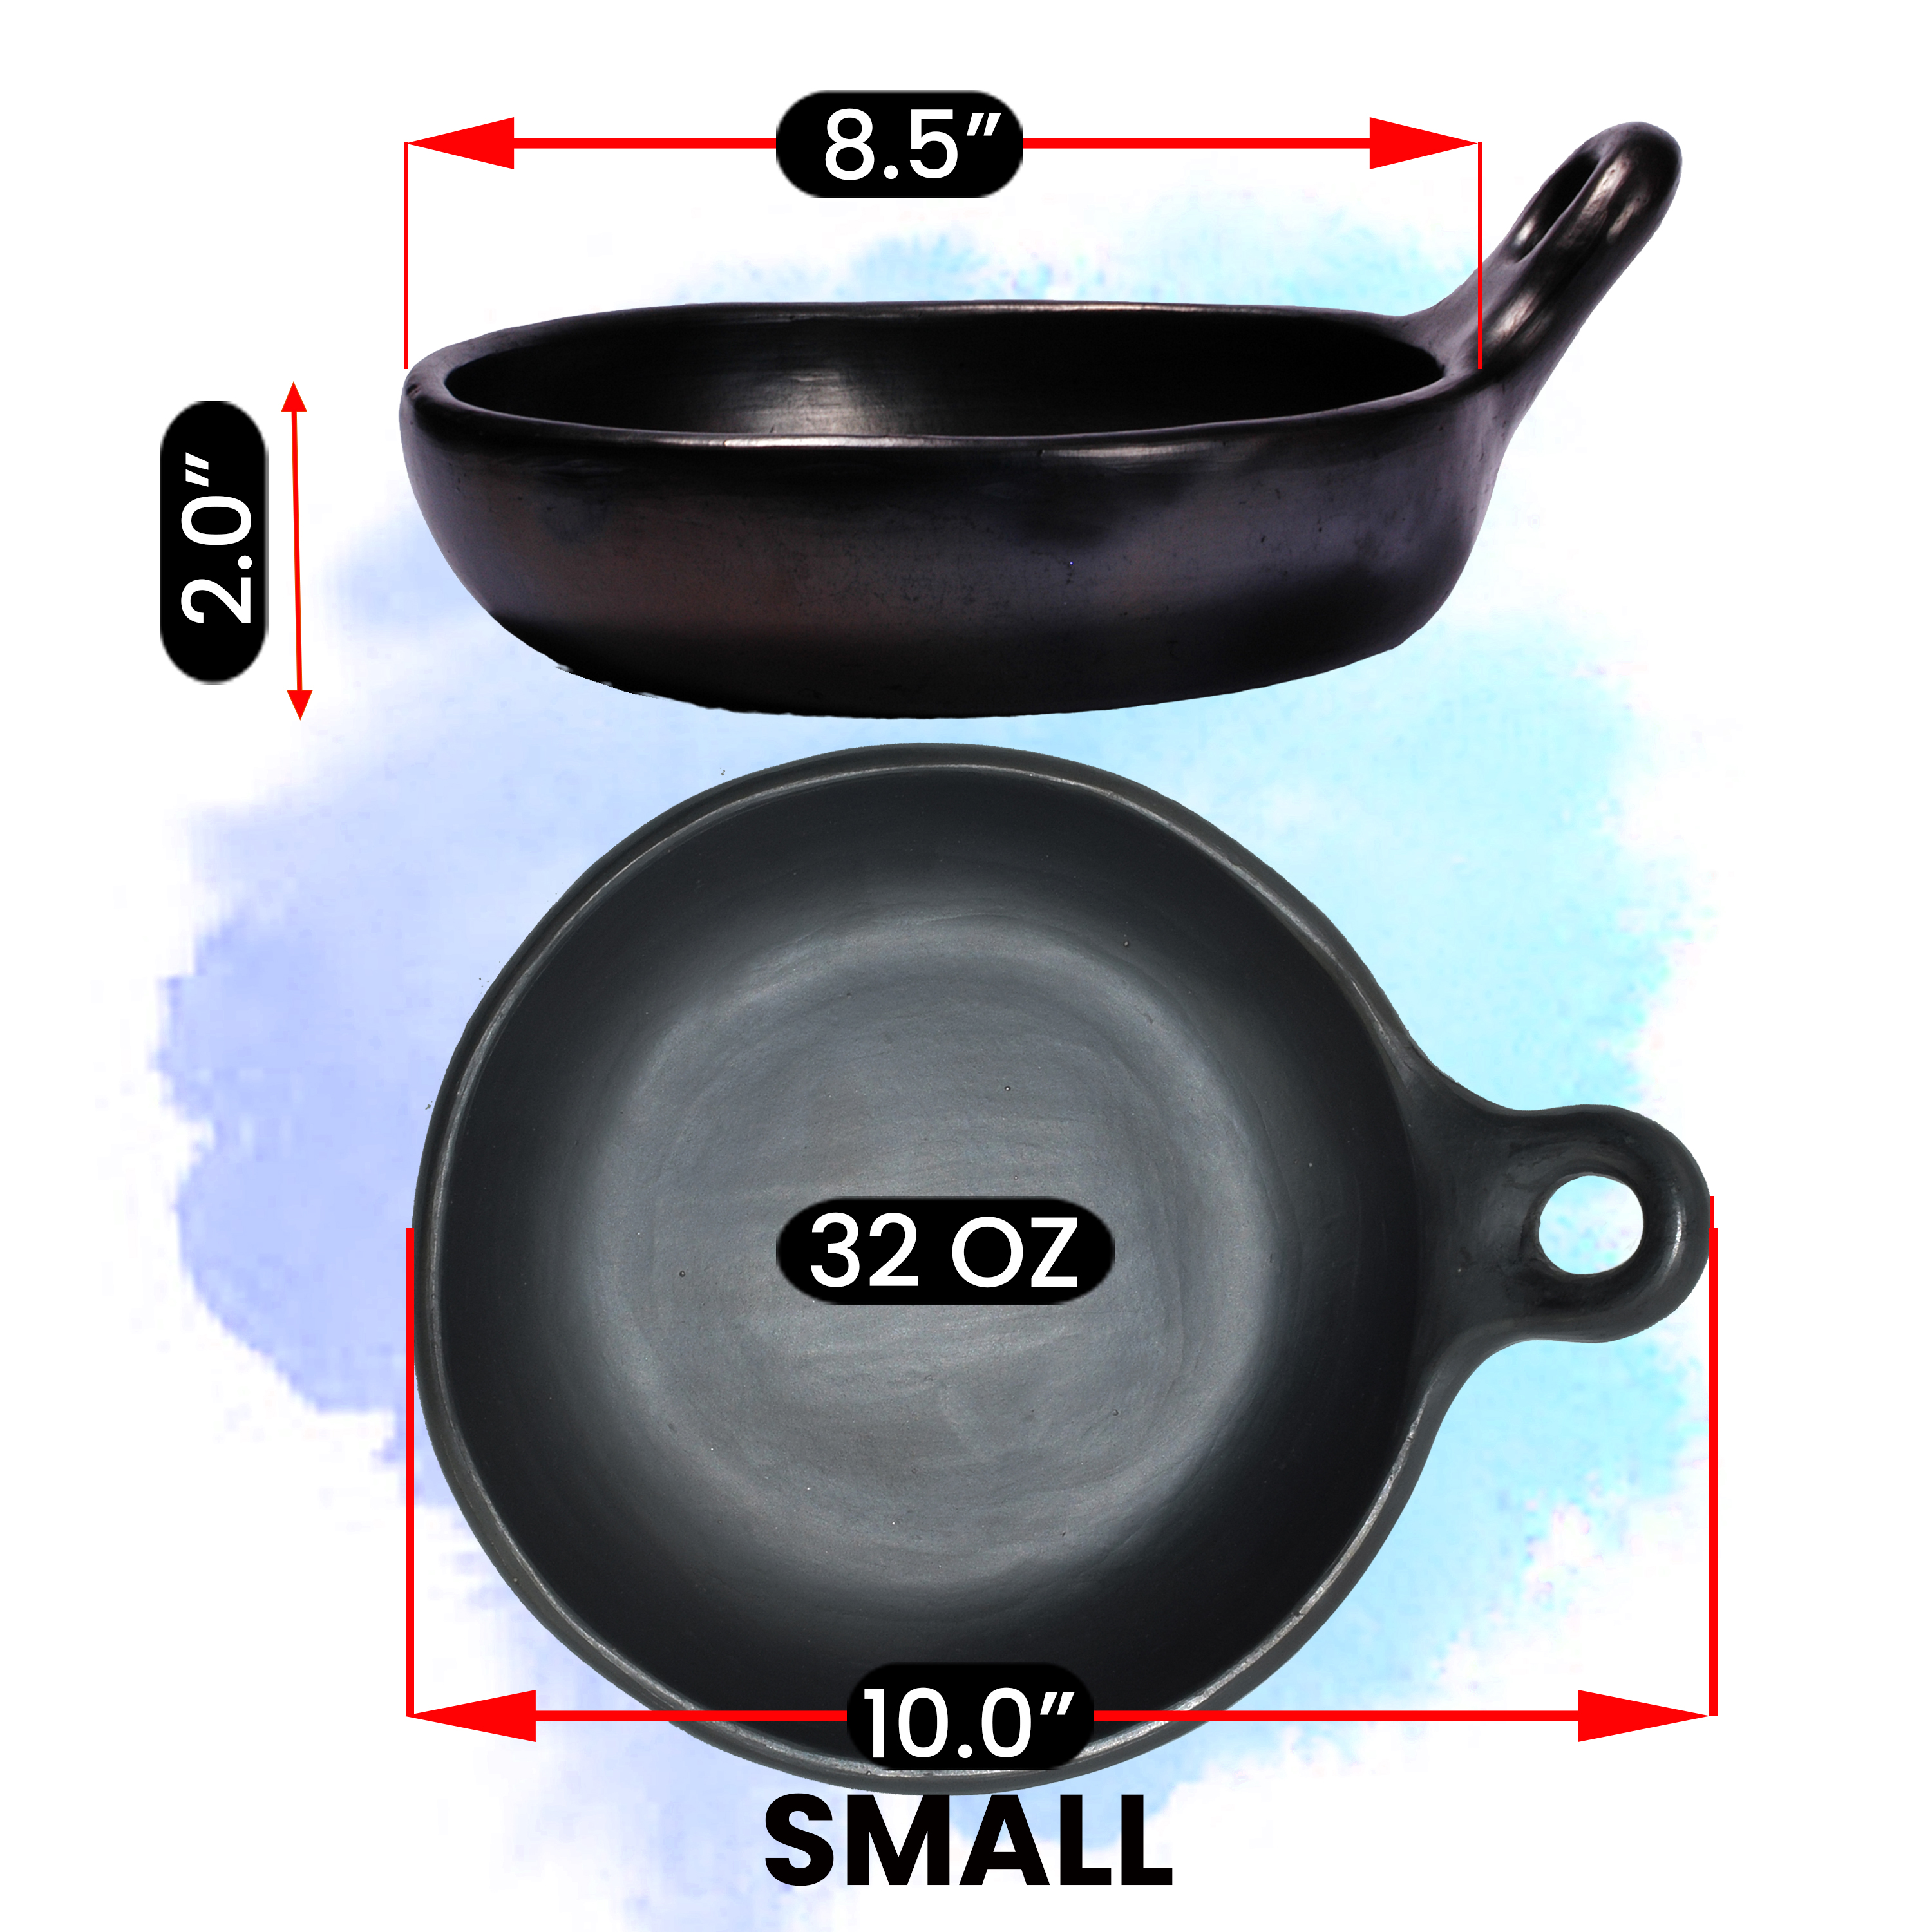 https://ancientcookware.com/images/stories/virtuemart/product/col_3050_10_Large_with_measurements8.jpg